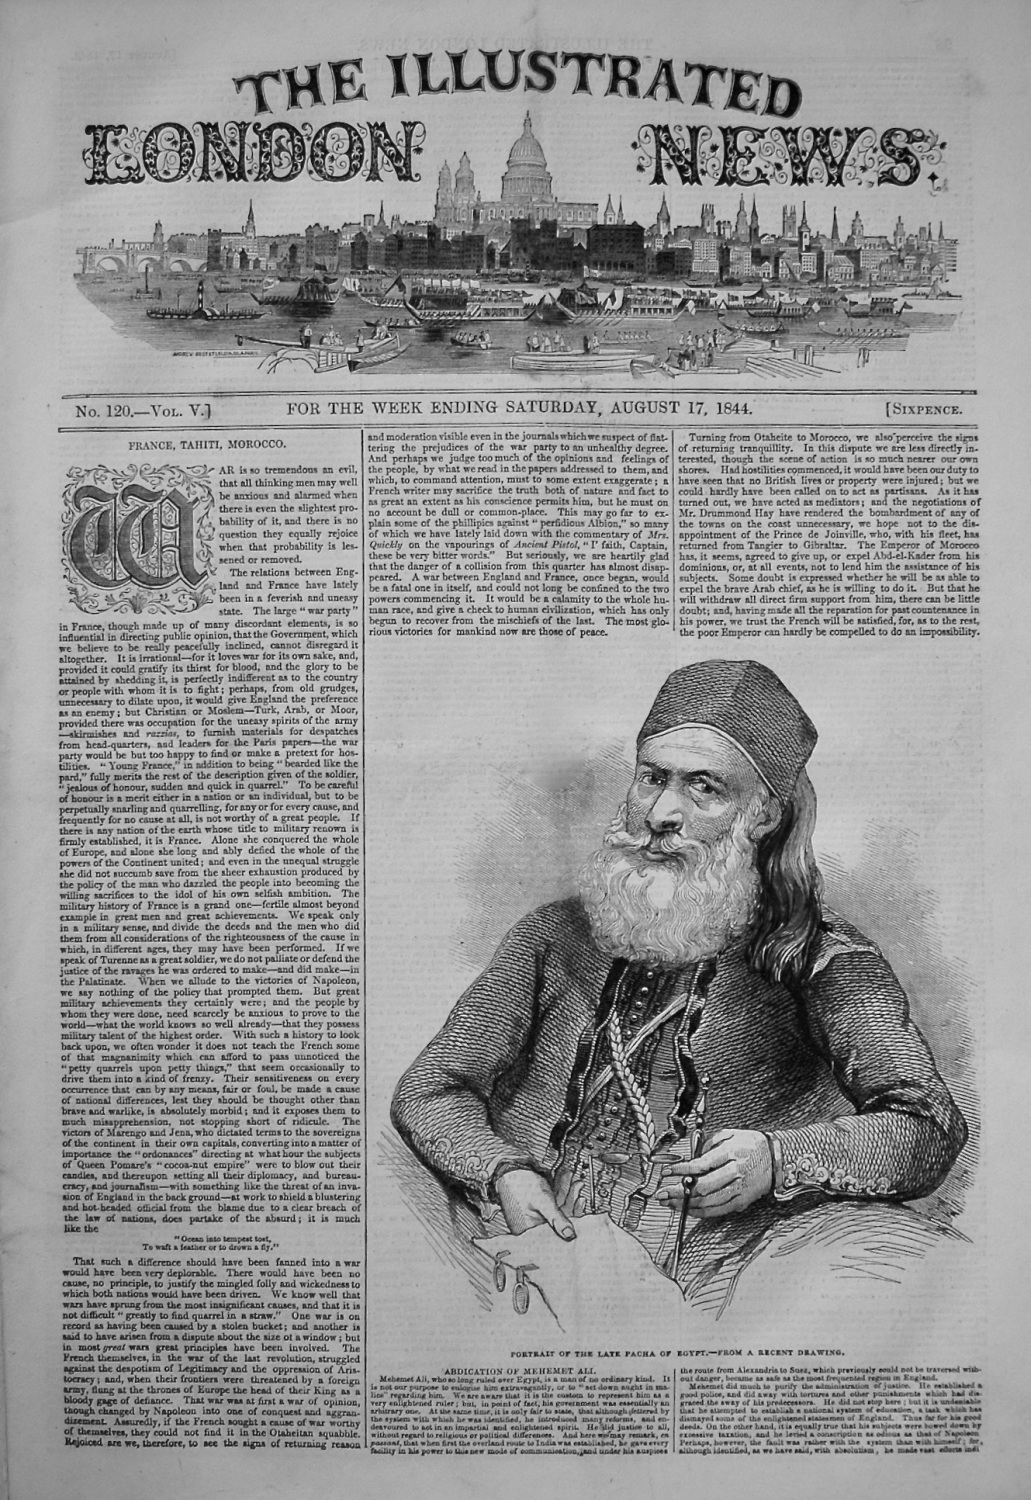 Illustrated London News. August 17th, 1844.